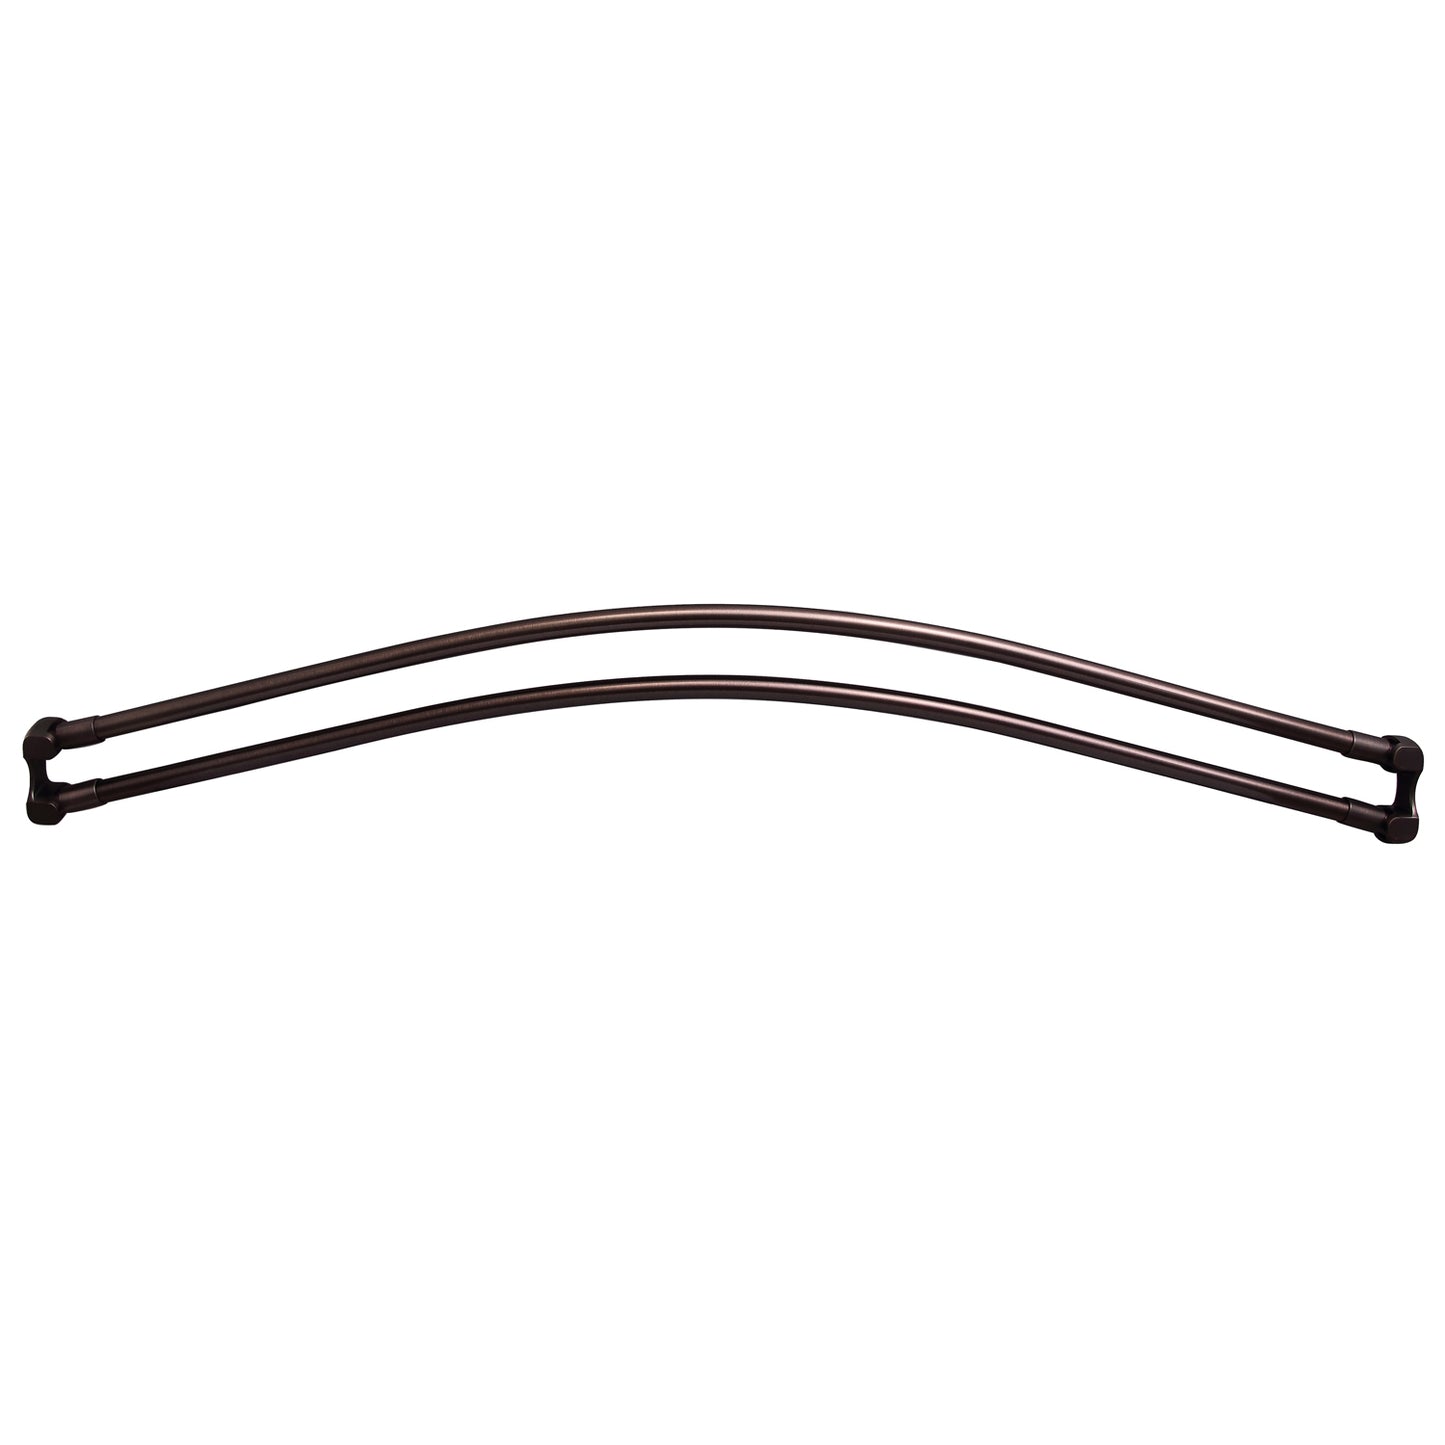 60" Double Curved Shower Curtain Rod in Oil Rubbed Bronze